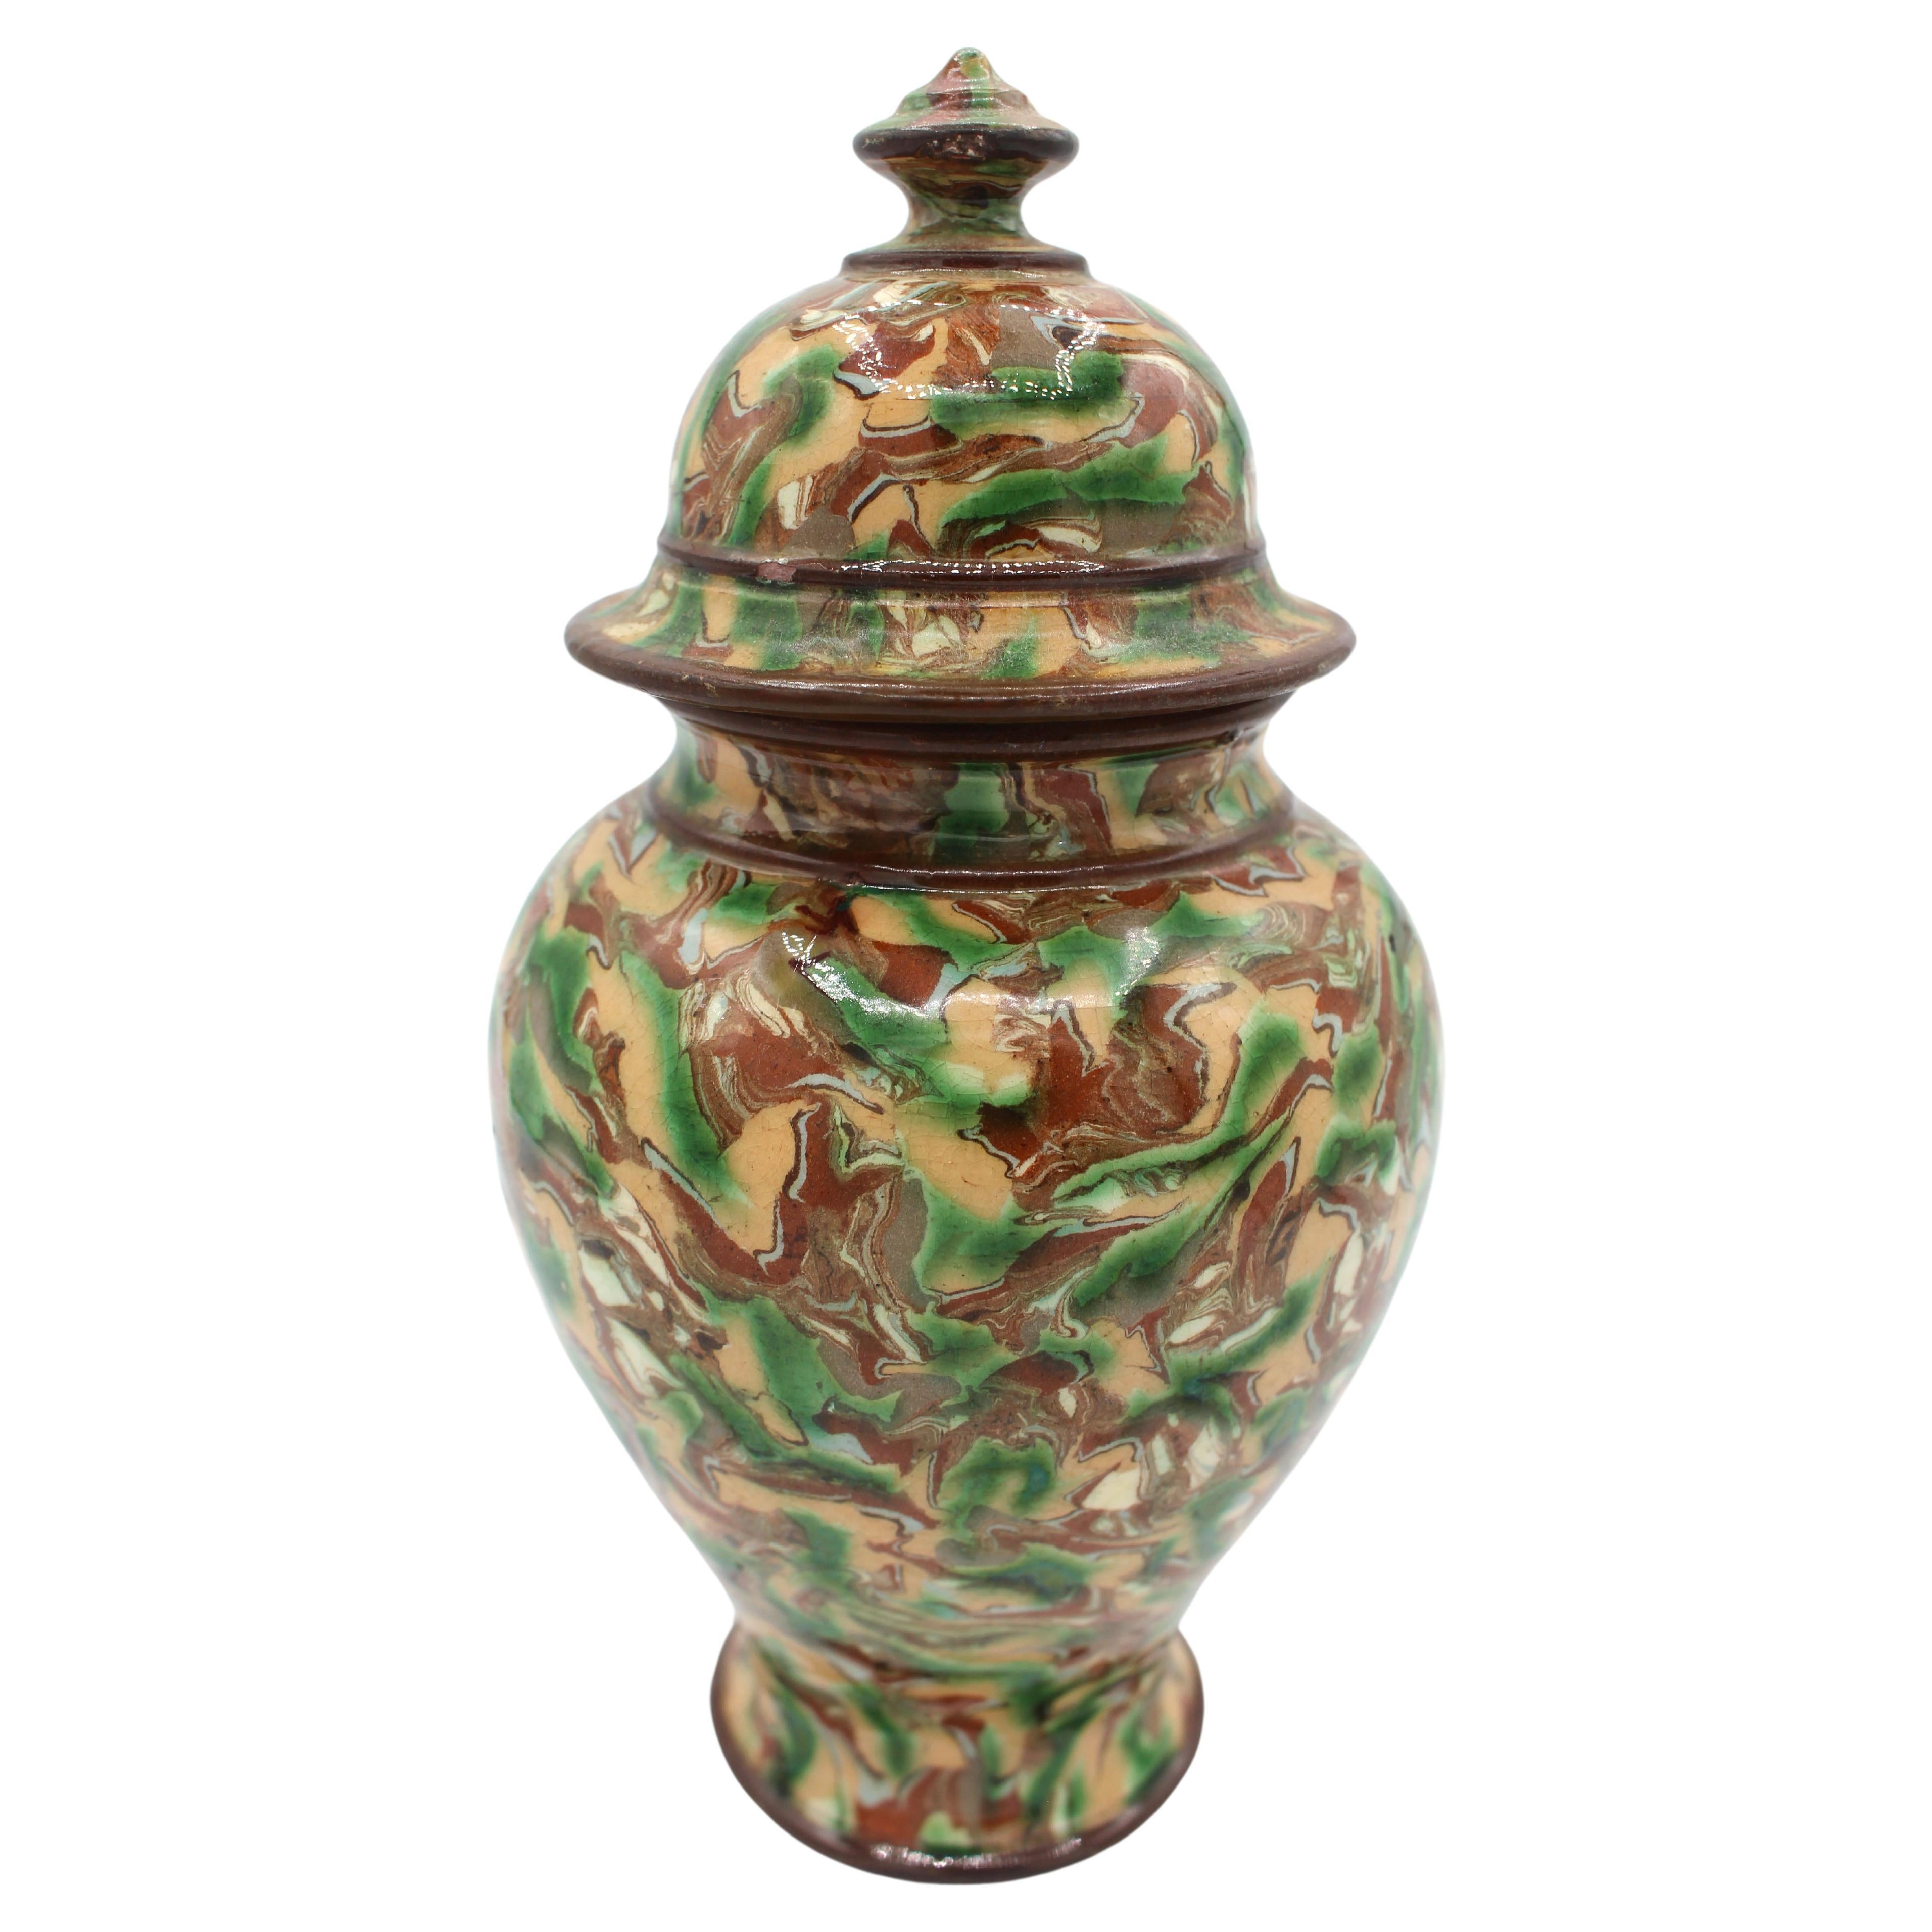 Circa 1900 Terracotta Covered Jar, French, by Maison Pichon Uzes For Sale